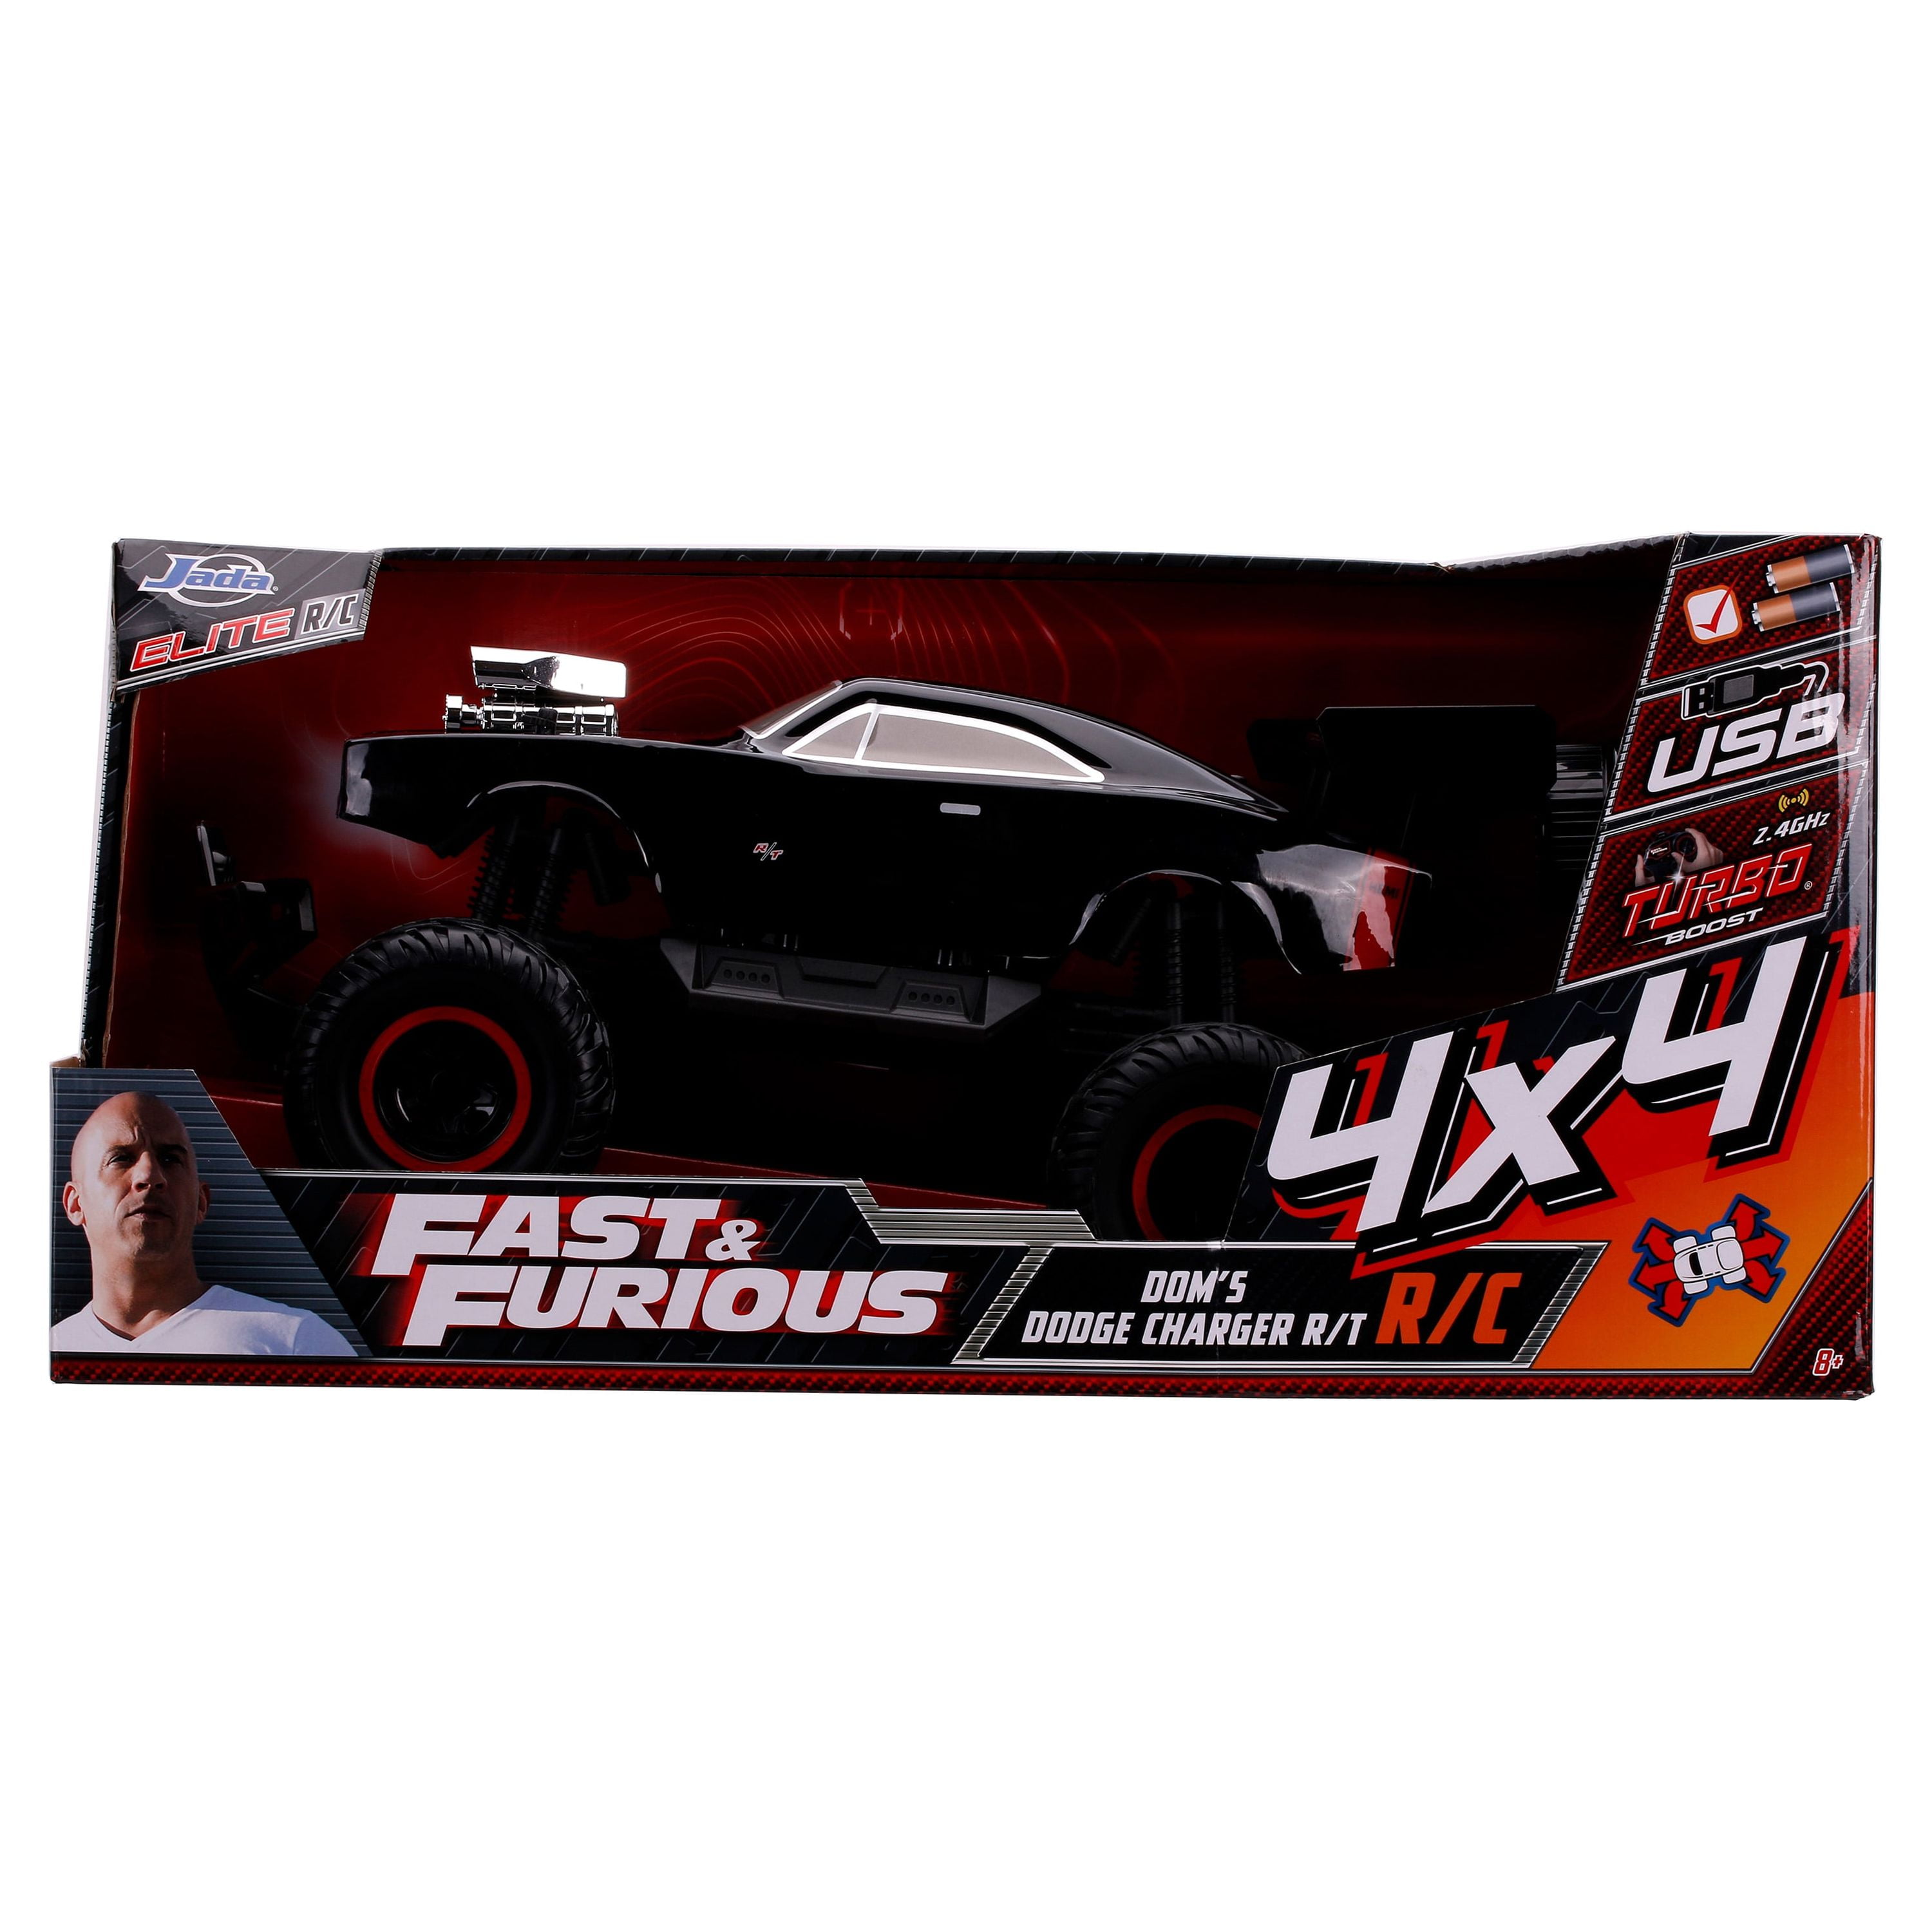 Fast & Furious 1:12 4x4 Dom's Dodge Charger Elite RC Remote Control Car 2.4  Ghz, Toys for Kids and Adults